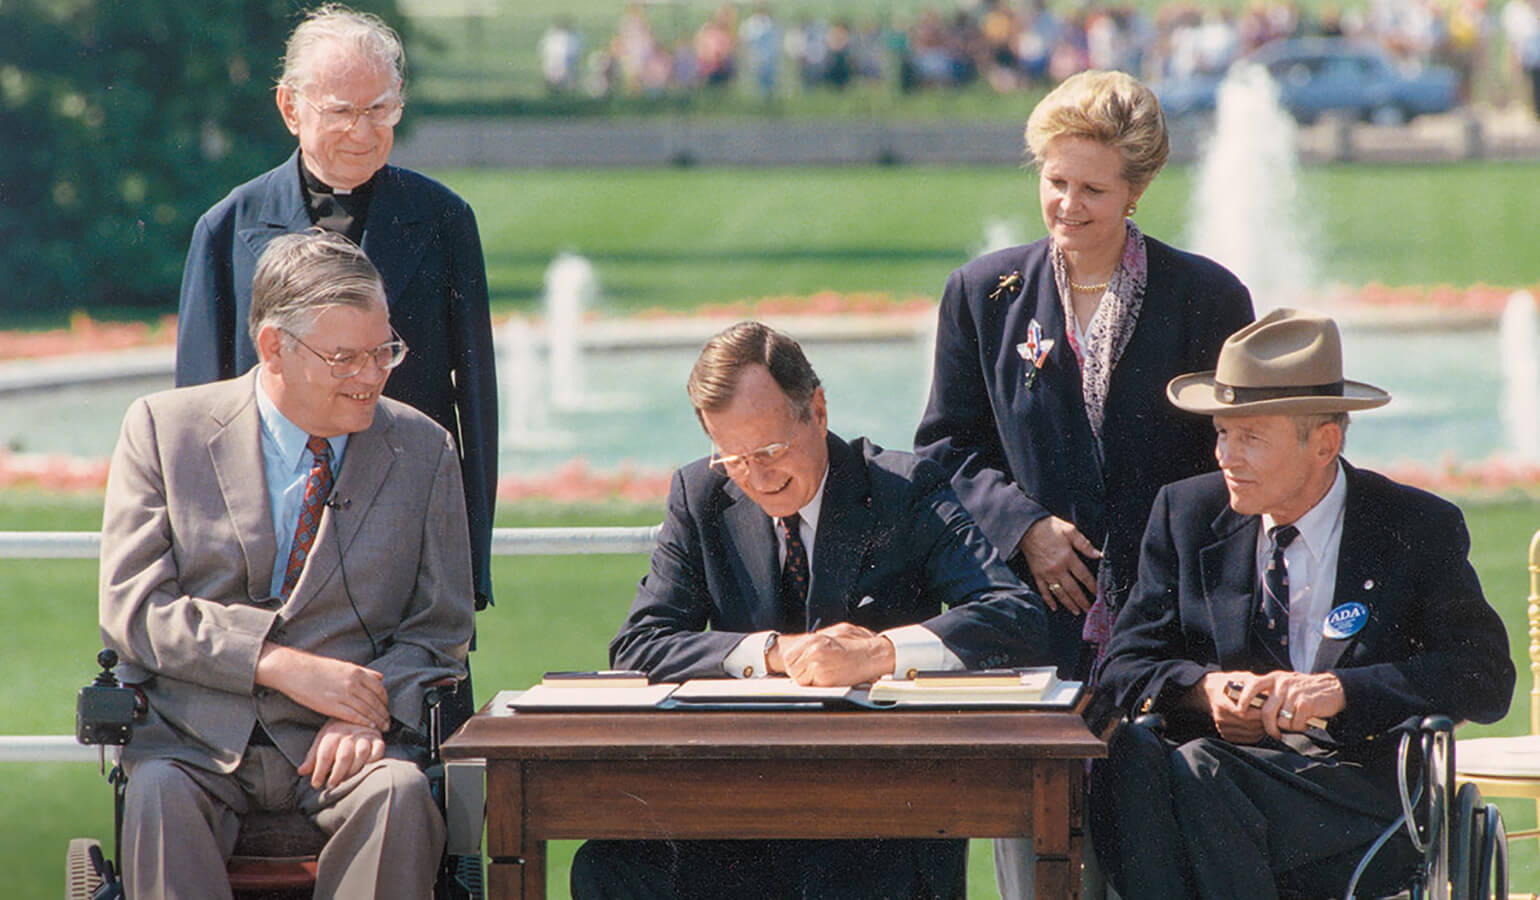 An Image of President George H.W. Bush signing the ADA into law in 1990. On his left, Evan Kemp sits in his wheelchair while Reverend Harold Wilke stands behind him. On his right, Justin Dart sits in his wheelchair and Swift Parrino stands behind the President.